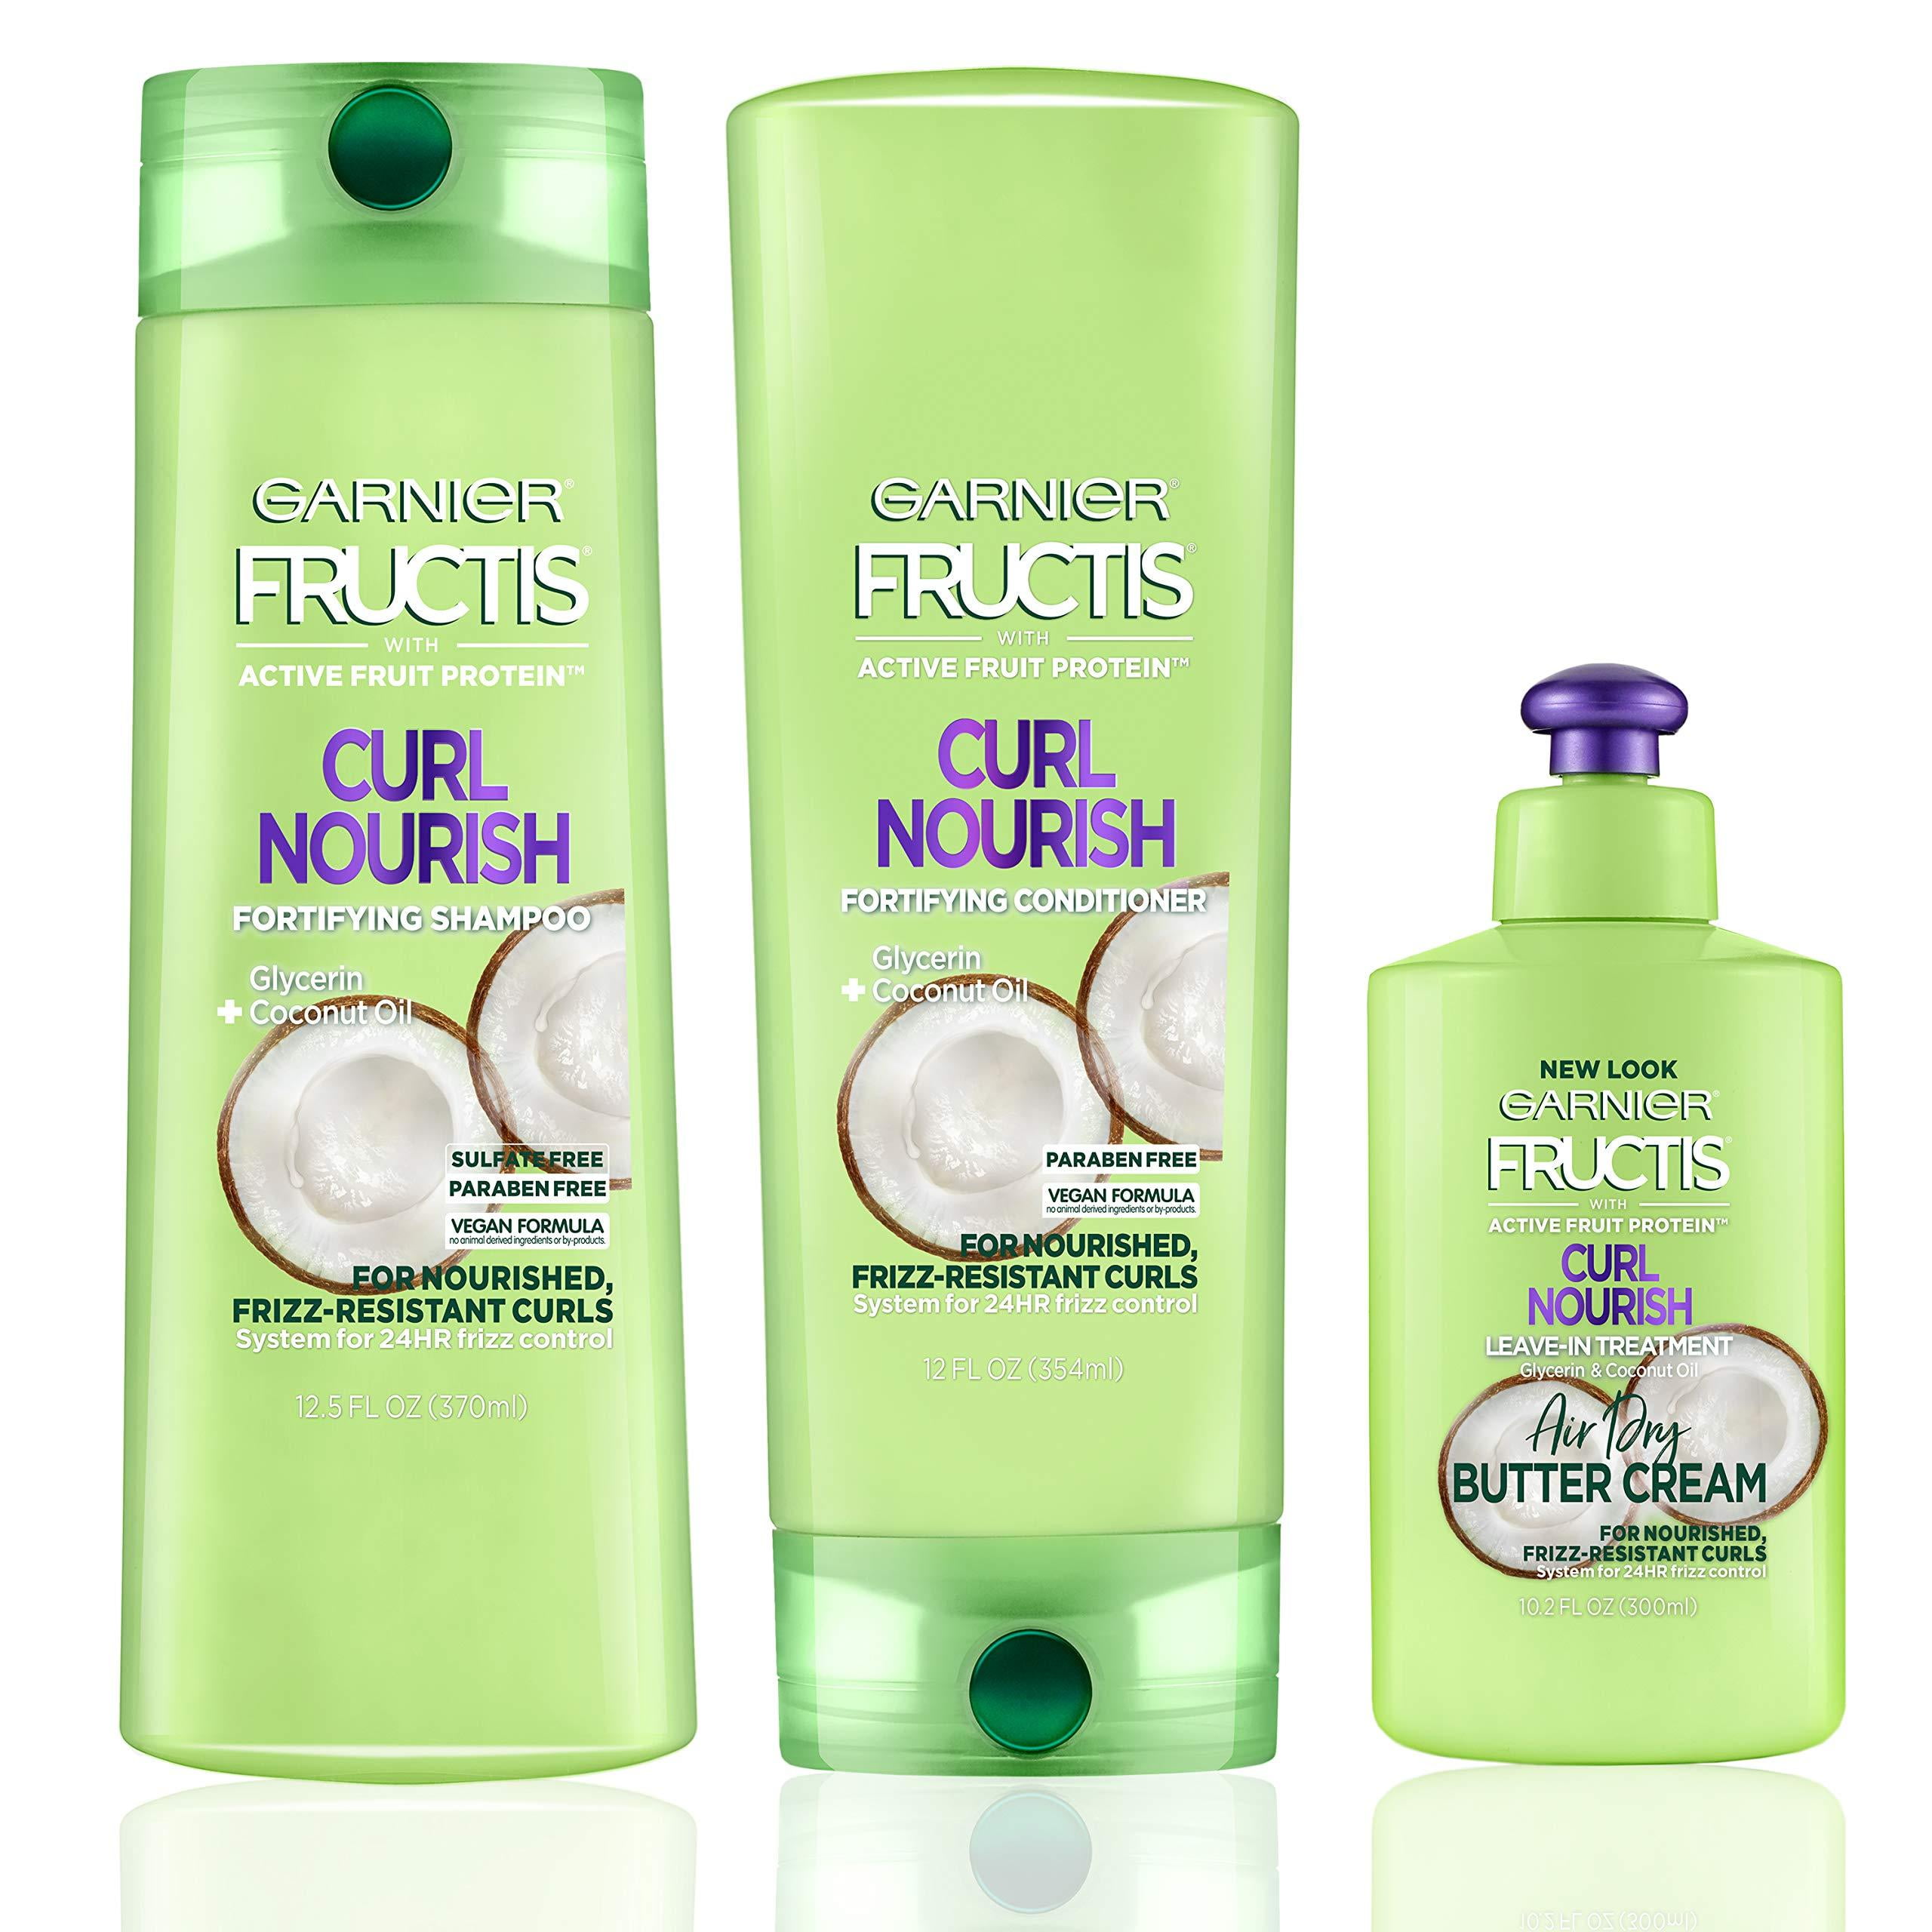 Zaailing woensdag monster Garnier Hair Care Fructis Curl Nourish Shampoo, Conditioner, and Butter  Cream Leave In Conditioner Kit - Walmart.com